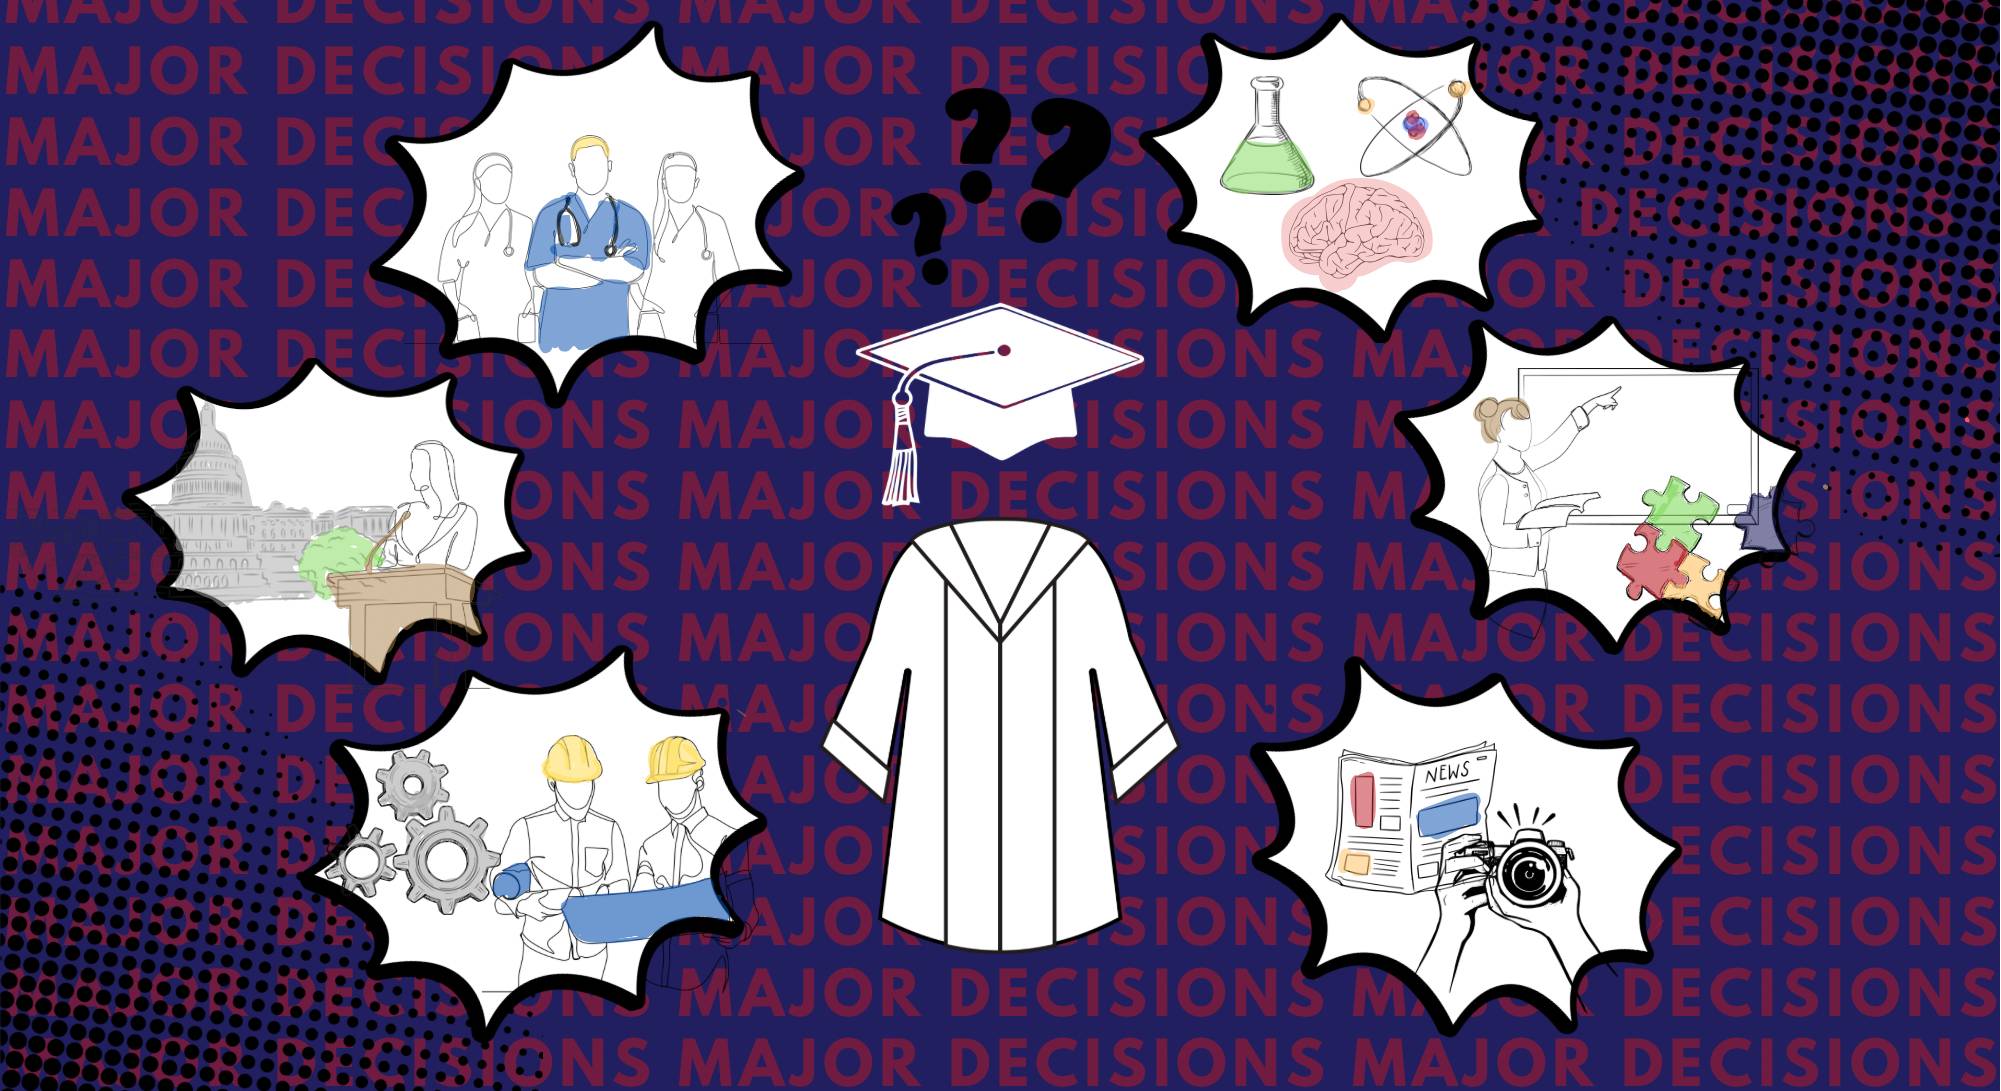 Choosing your college major: how to navigate choices, advisers, finding your path